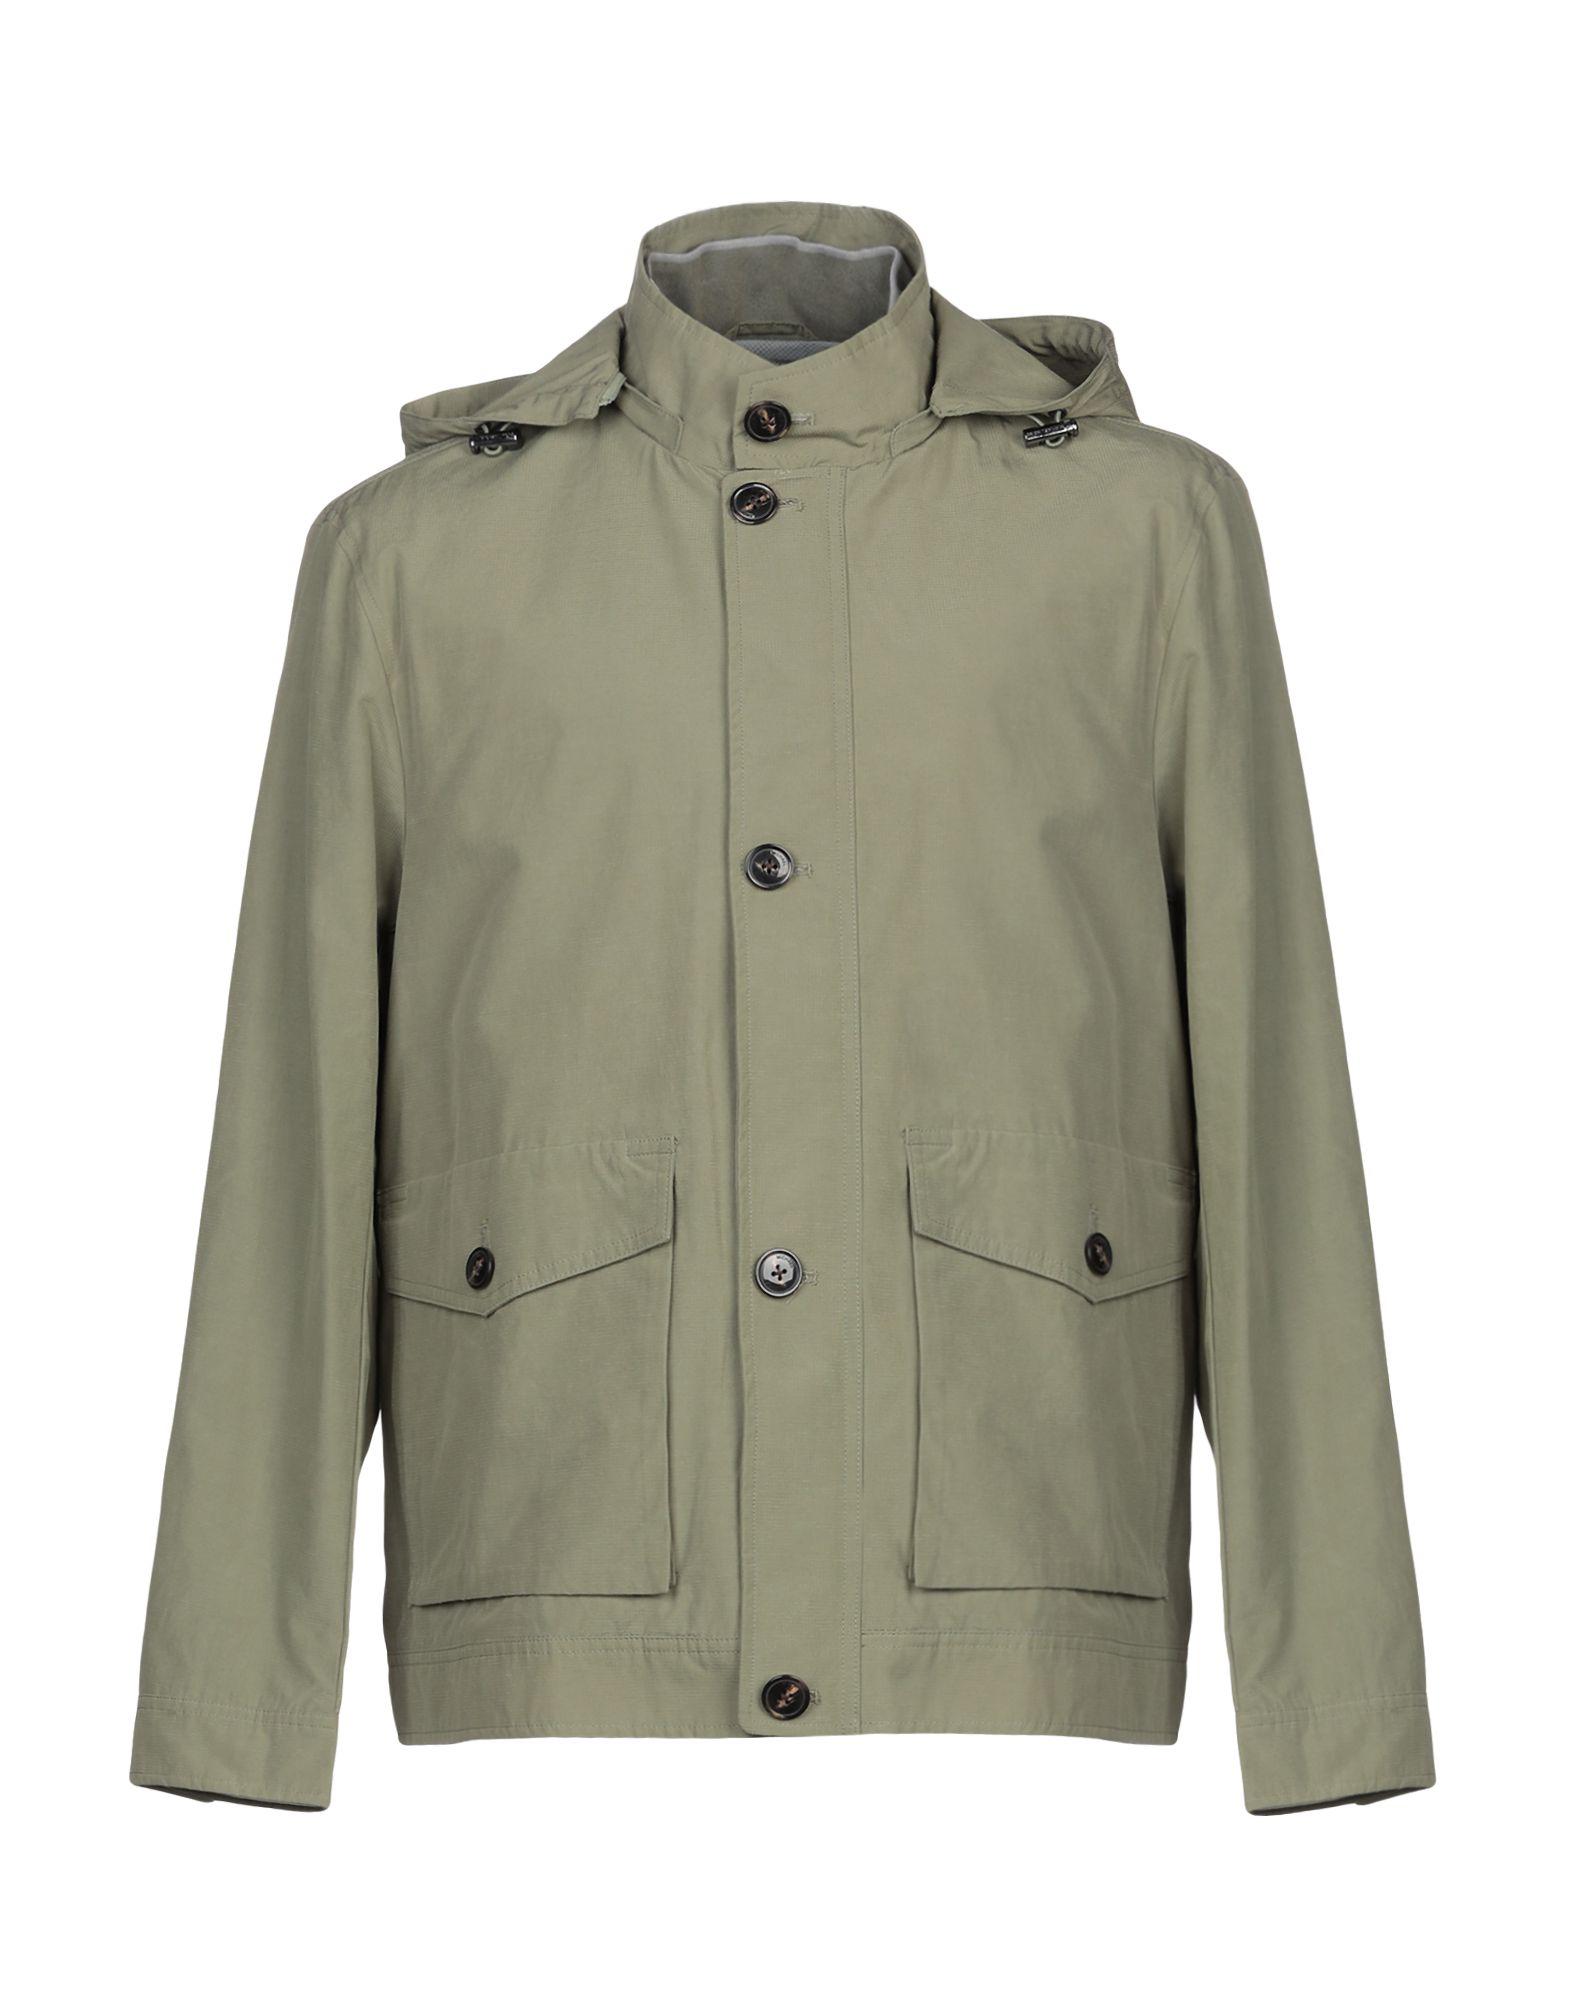 Michael Kors Synthetic Jacket in Green for Men - Lyst